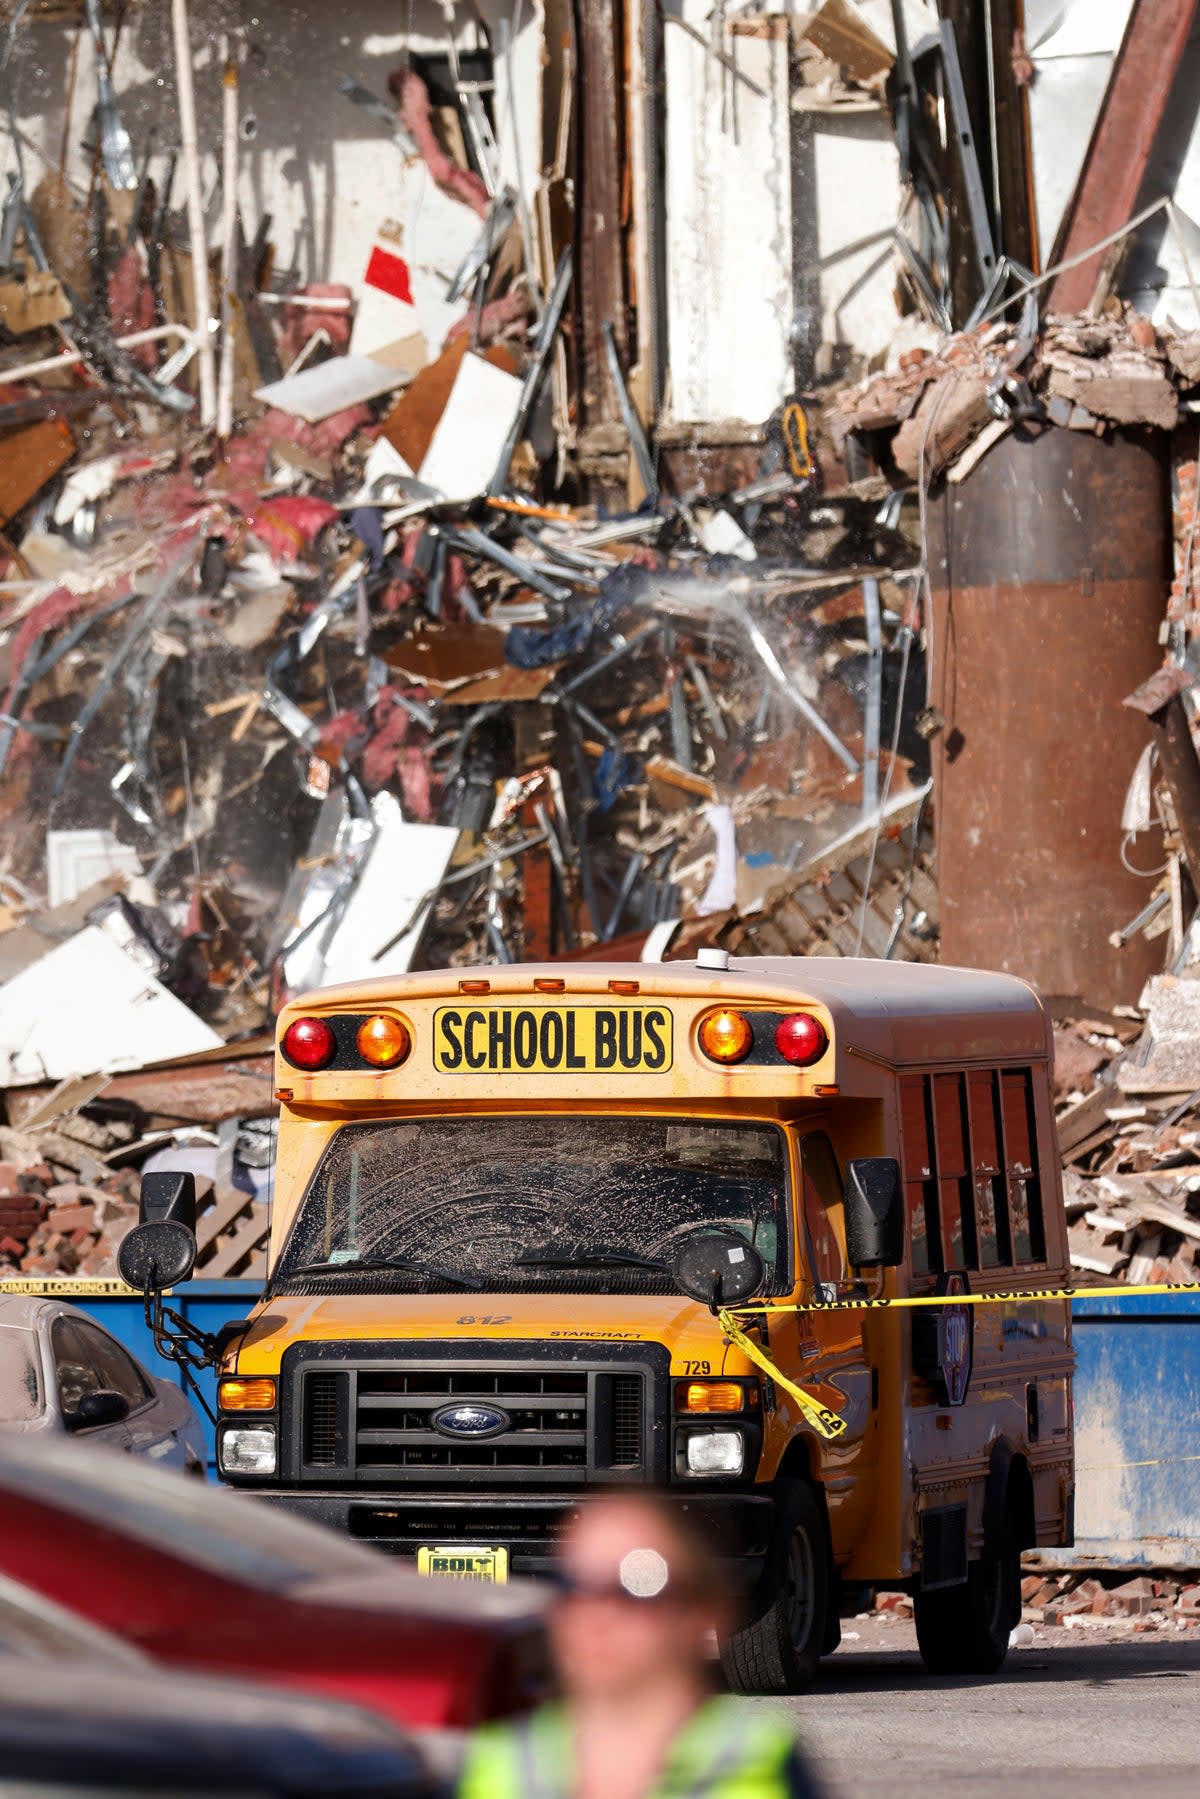 A school bus drives past the wreckage after the building collapse on Sunday (Quad City Times)